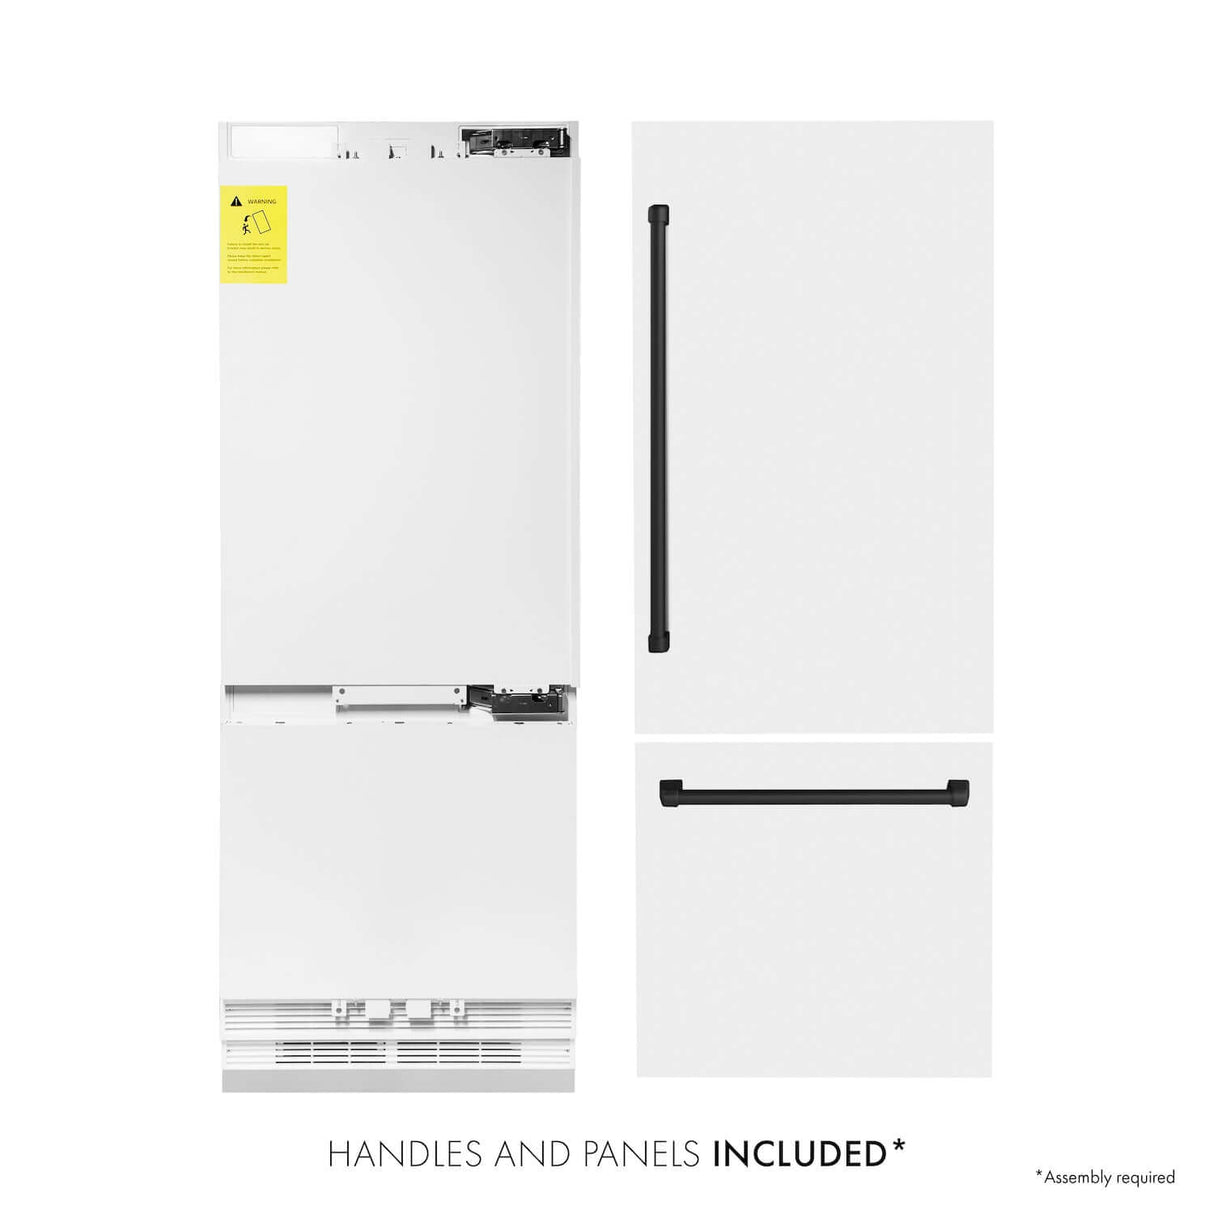 ZLINE Autograph Edition 30 in. 16.1 cu. ft. Built-in 2-Door Bottom Freezer Refrigerator with Internal Water and Ice Dispenser in White Matte with Matte Black Accents (RBIVZ-WM-30-MB)